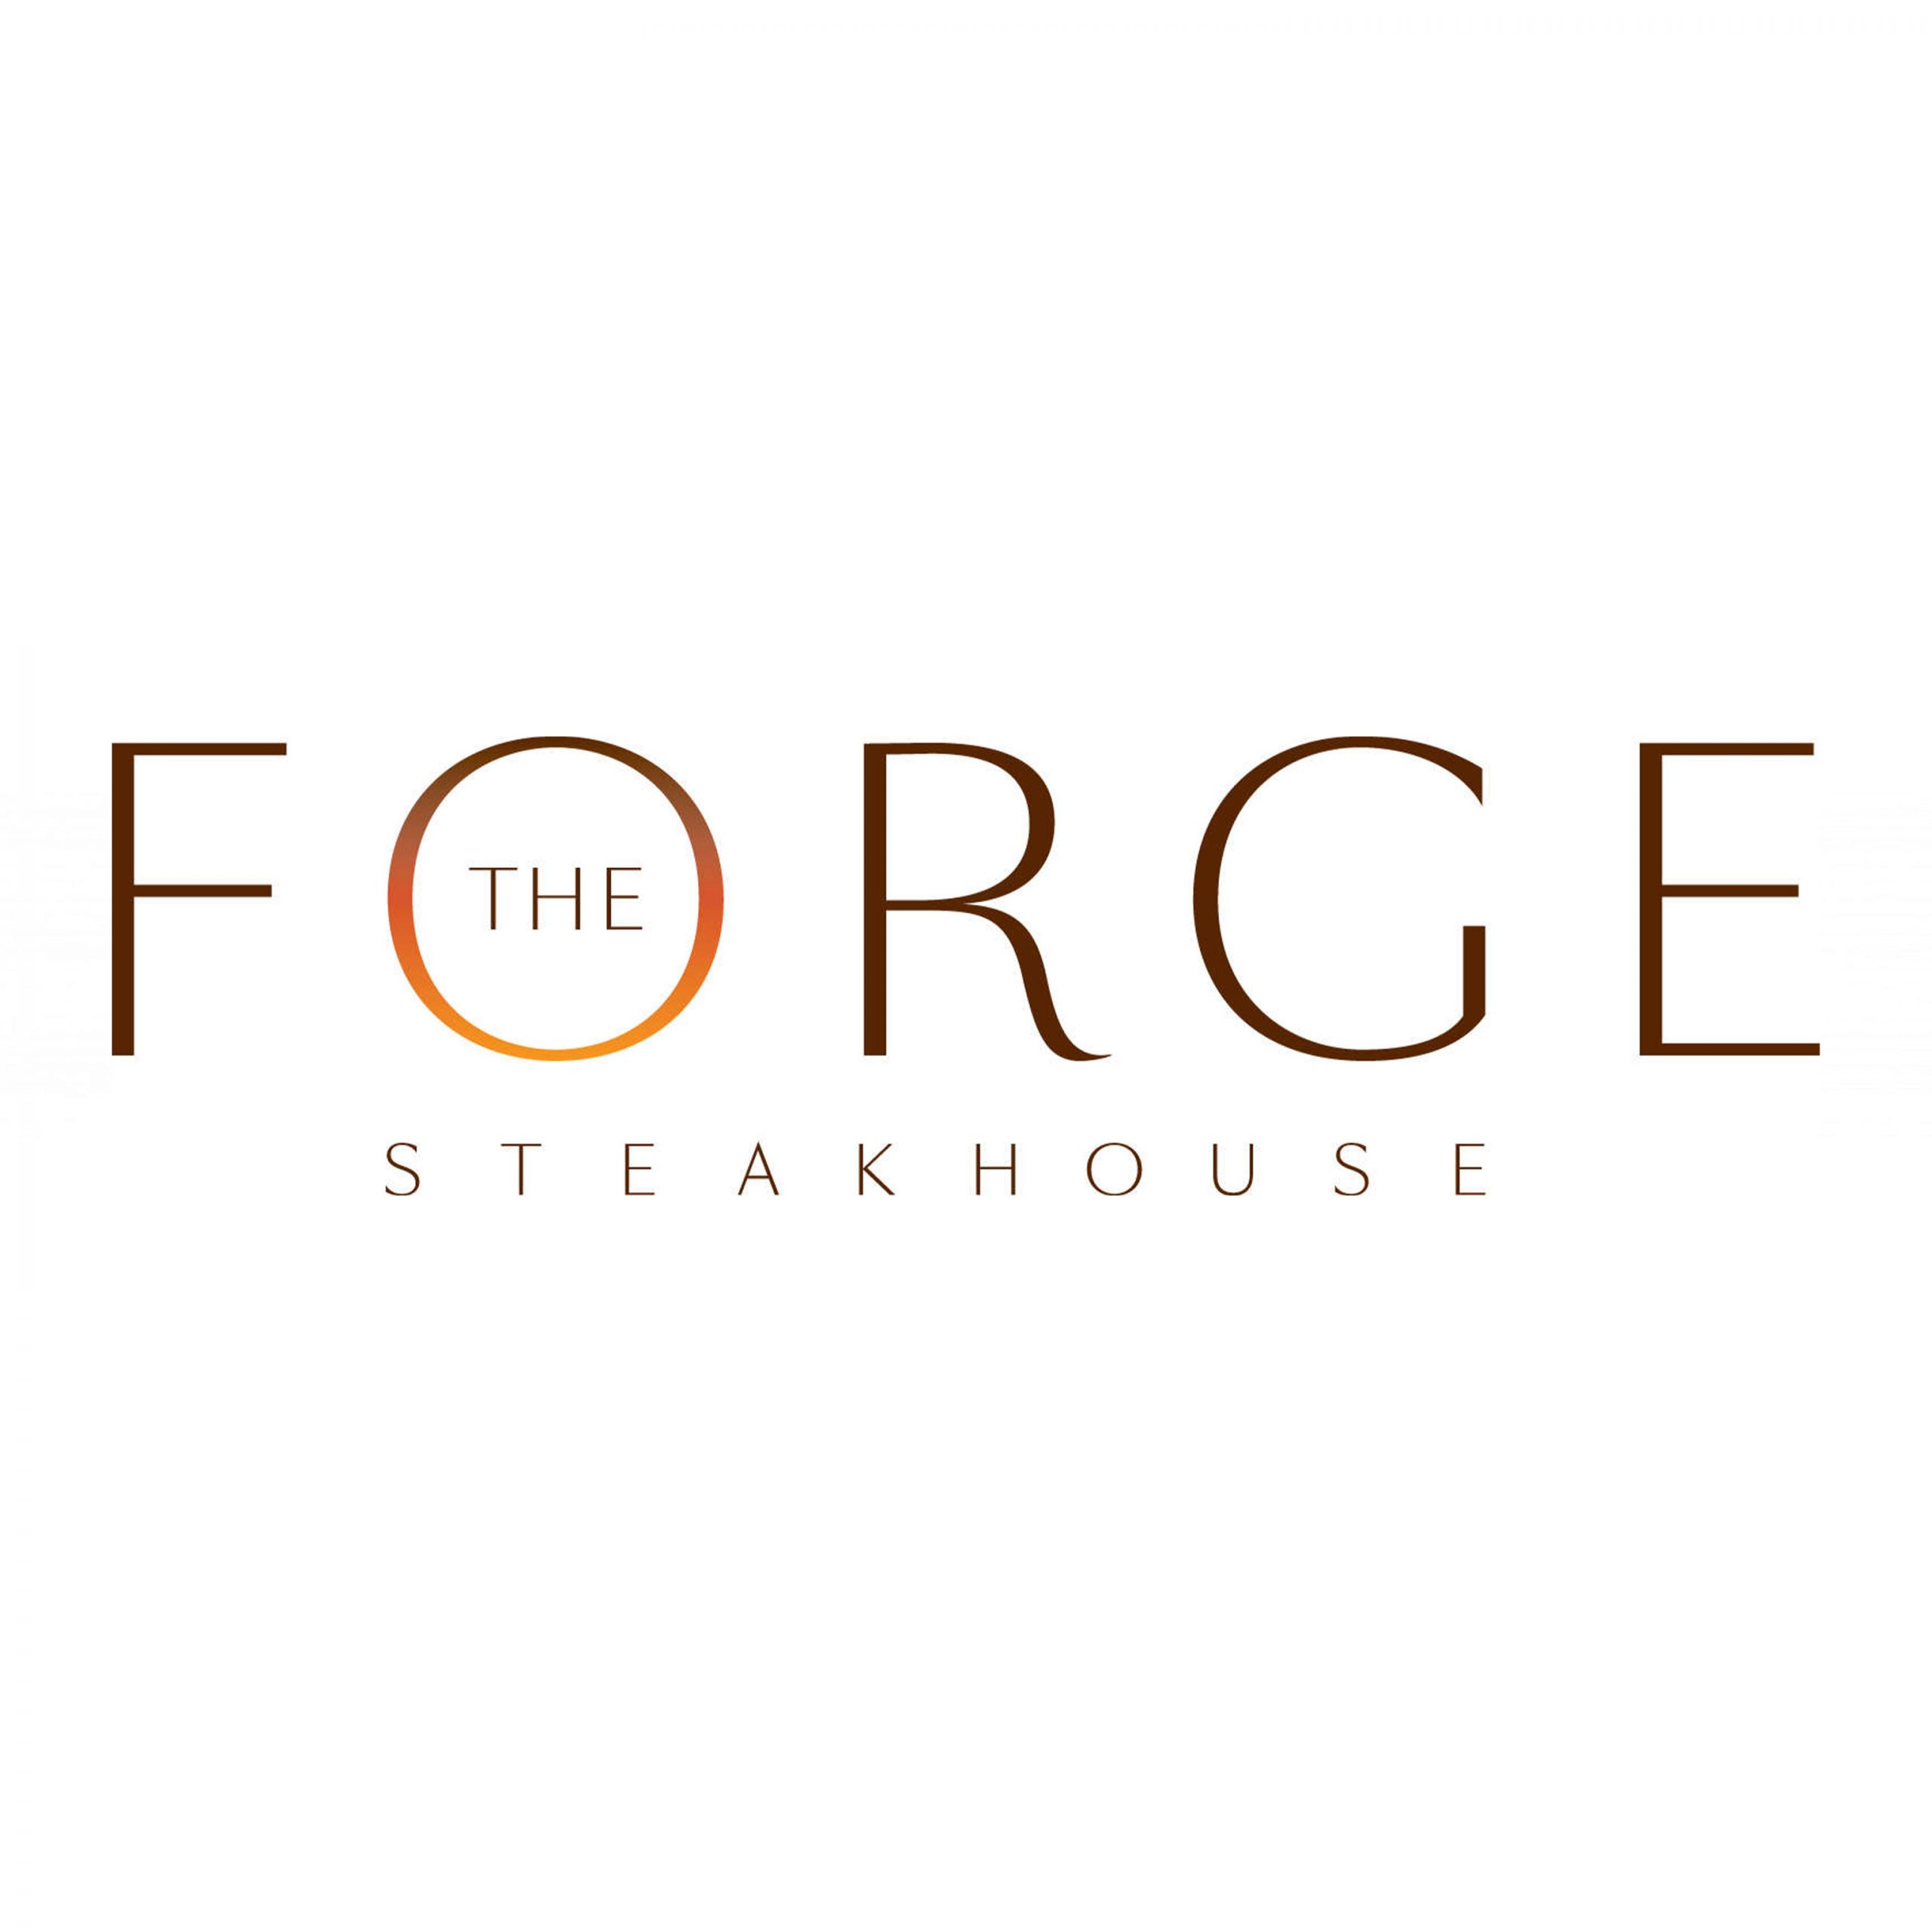 The Forge - Coming Soon in UAE